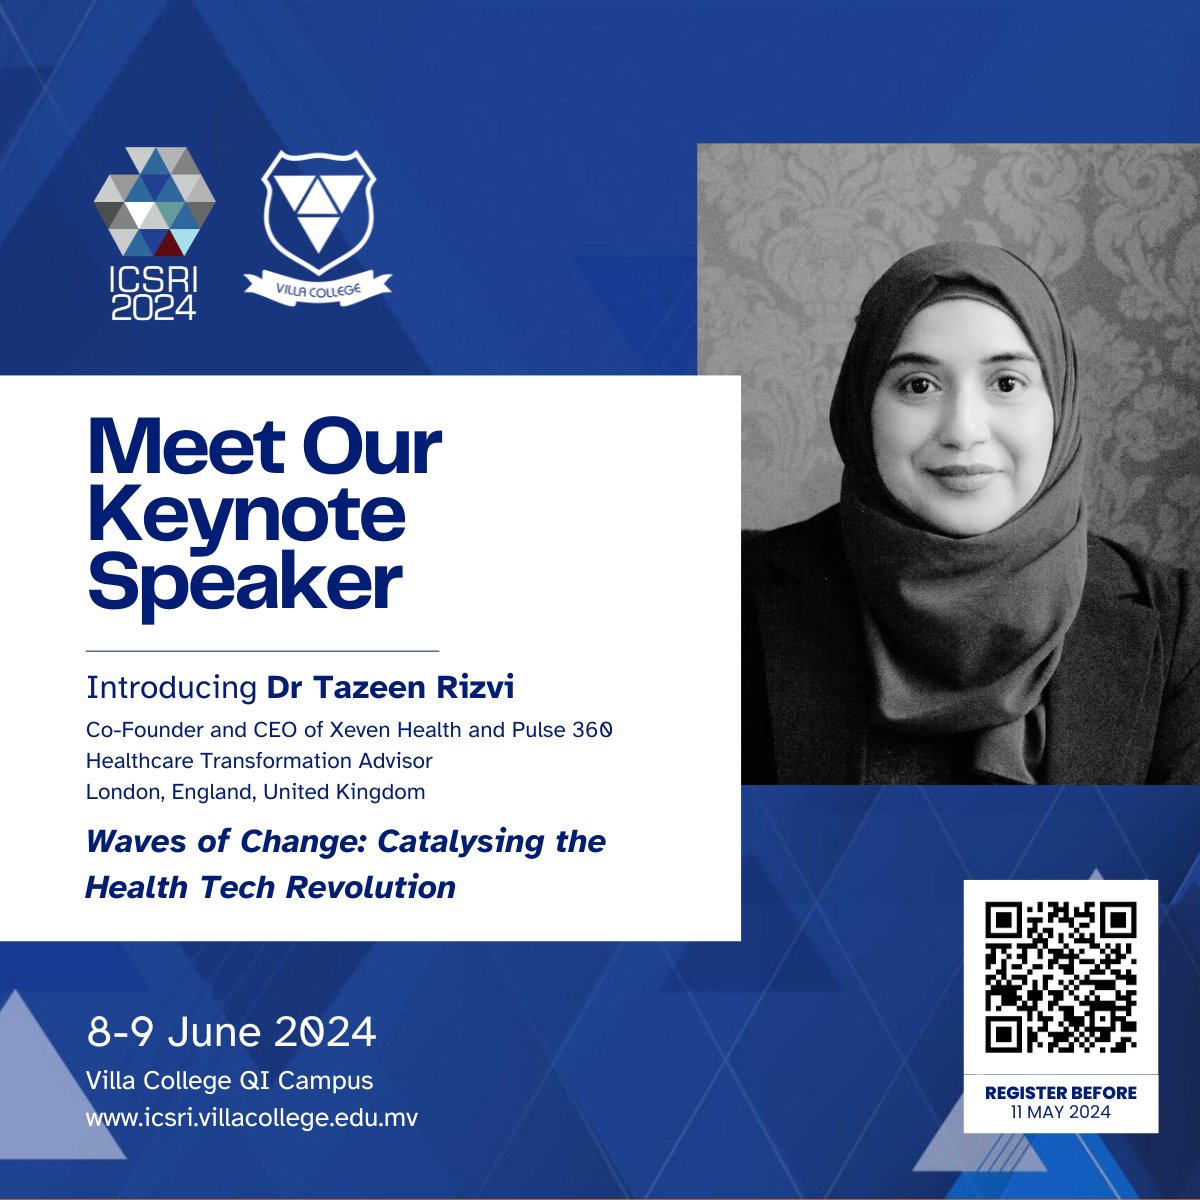 Introducing #ICSRI2024 Keynote Speaker, Dr Tazeen Rizvi. Dr Tazeen Rizvi is a Healthcare digital technology leader with more than 15 years of experience in digitisation, strategy, HIS implementation, market growth, and optimisation of digital technologies for integrated…